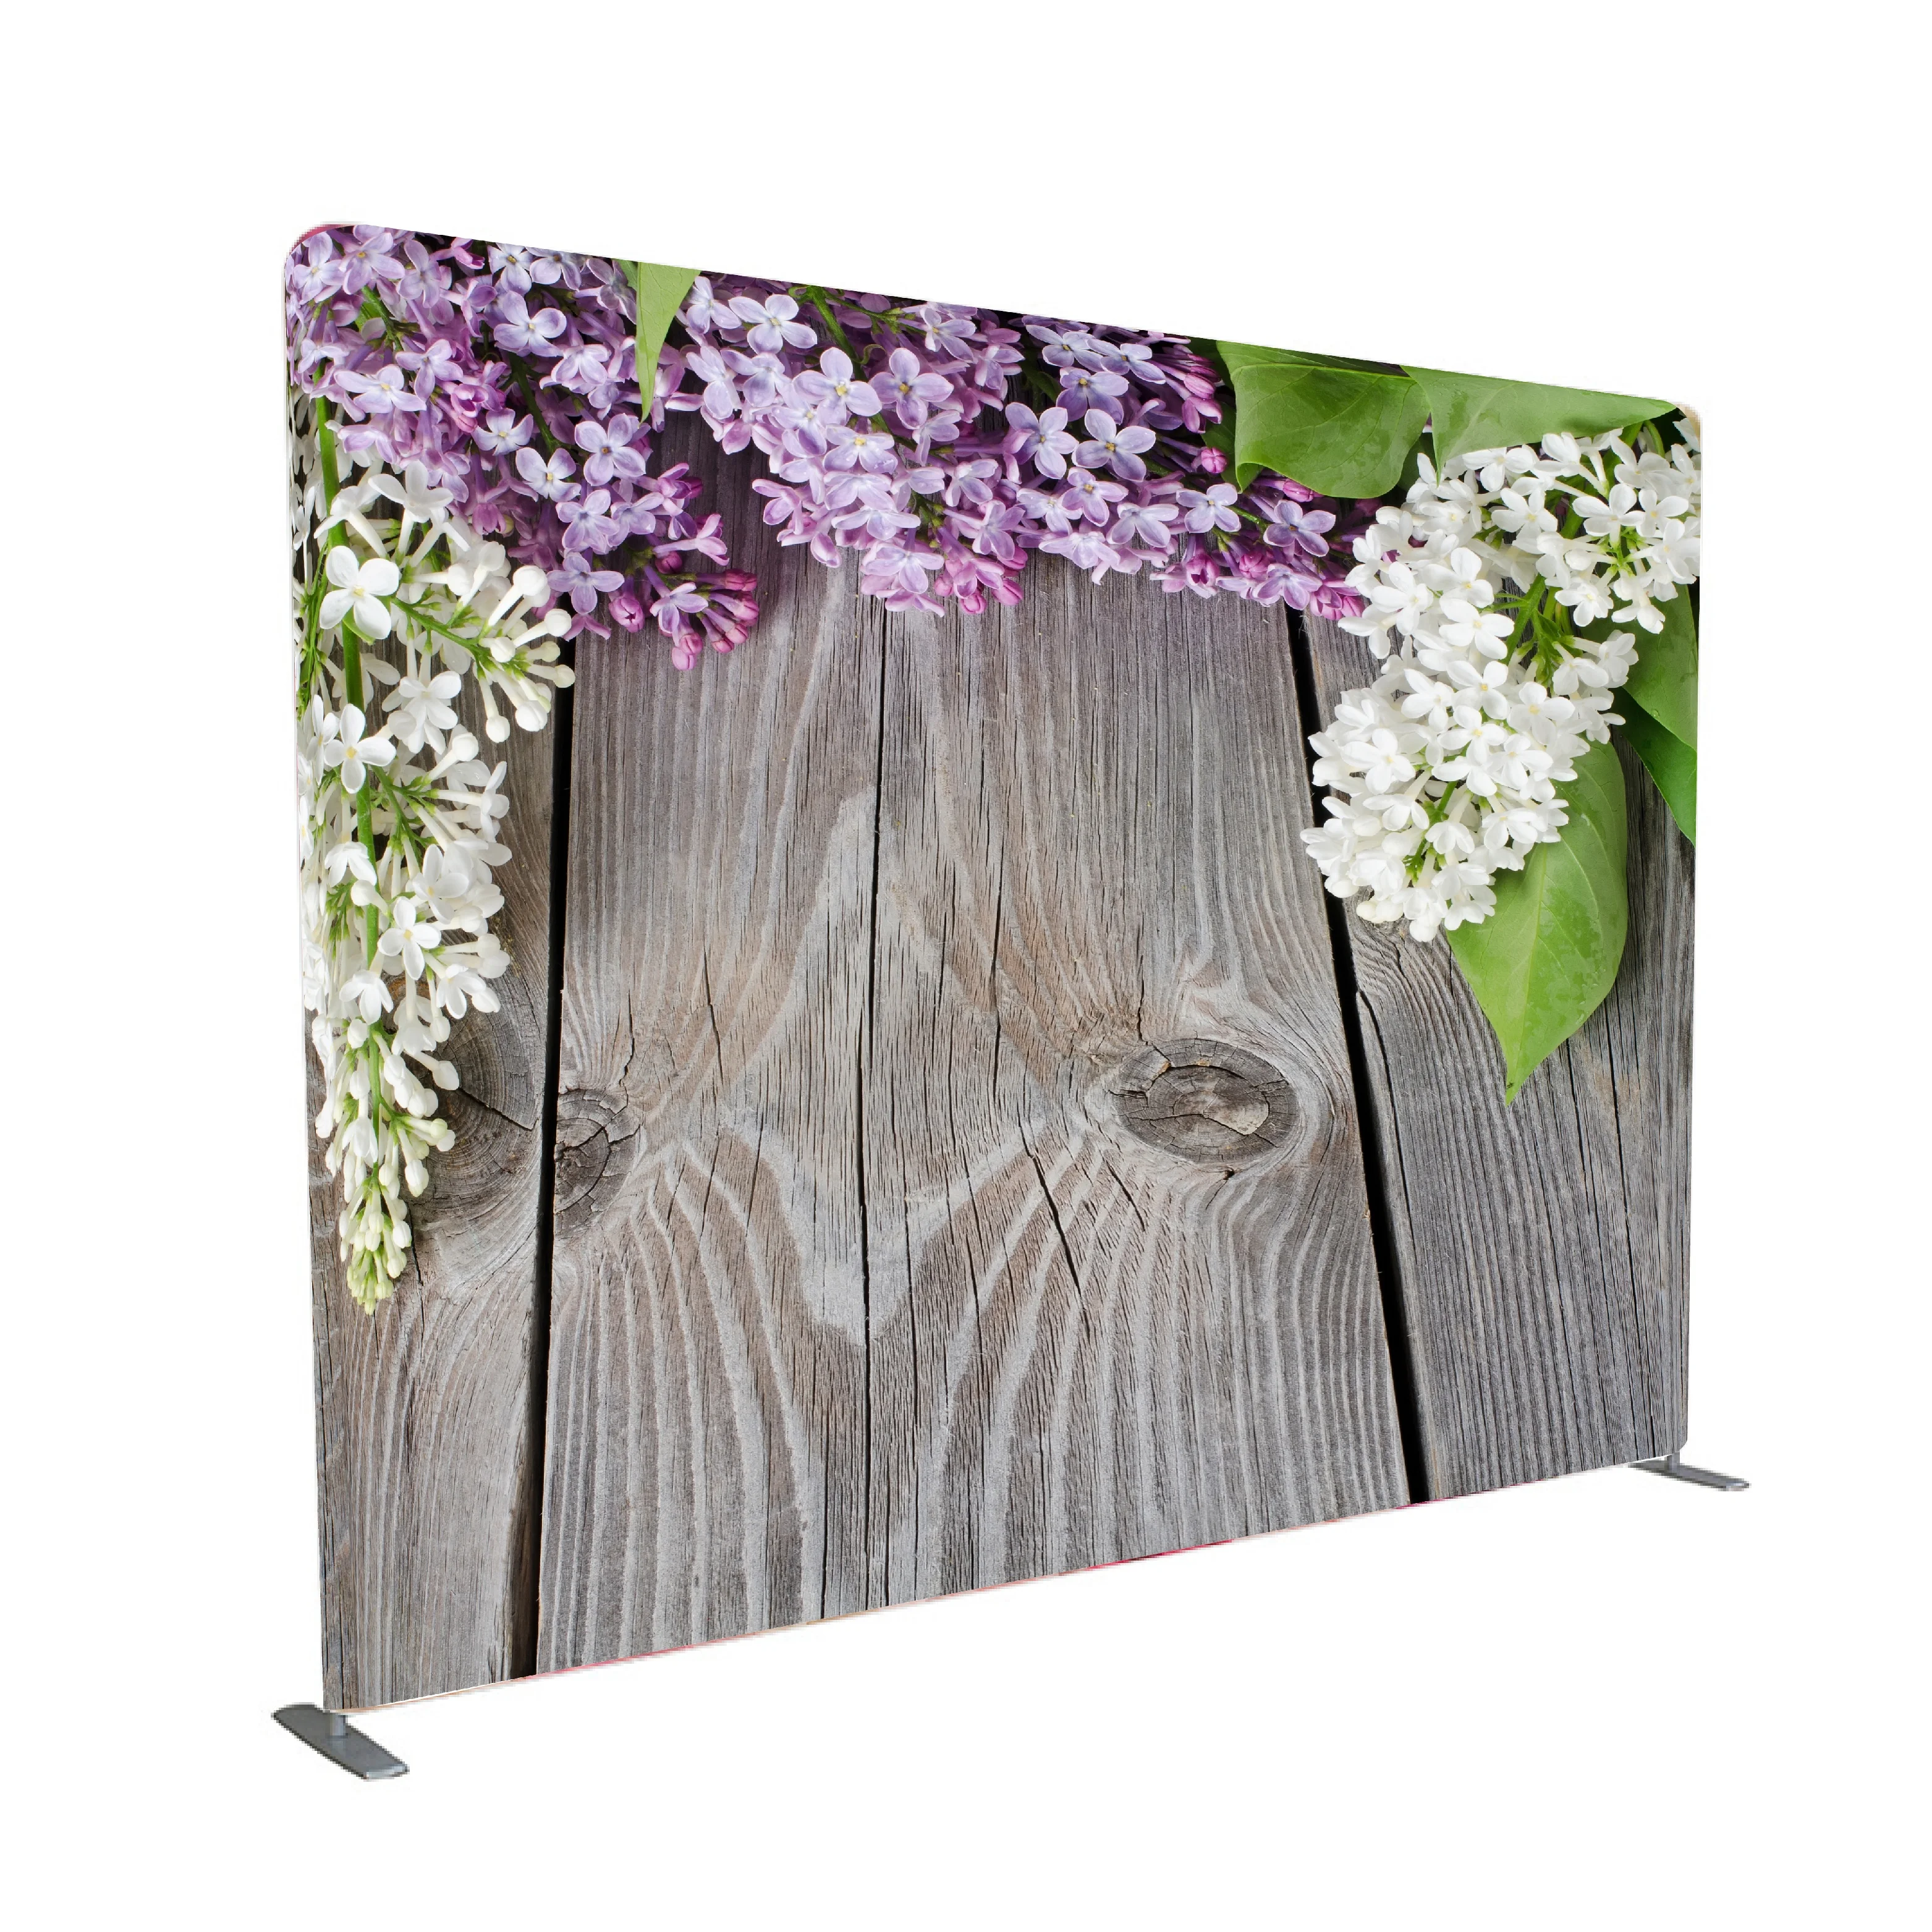 

8ft Aluminum straight shape fabric collapsible photo background flower wall backdrop stand wedding Backdrop